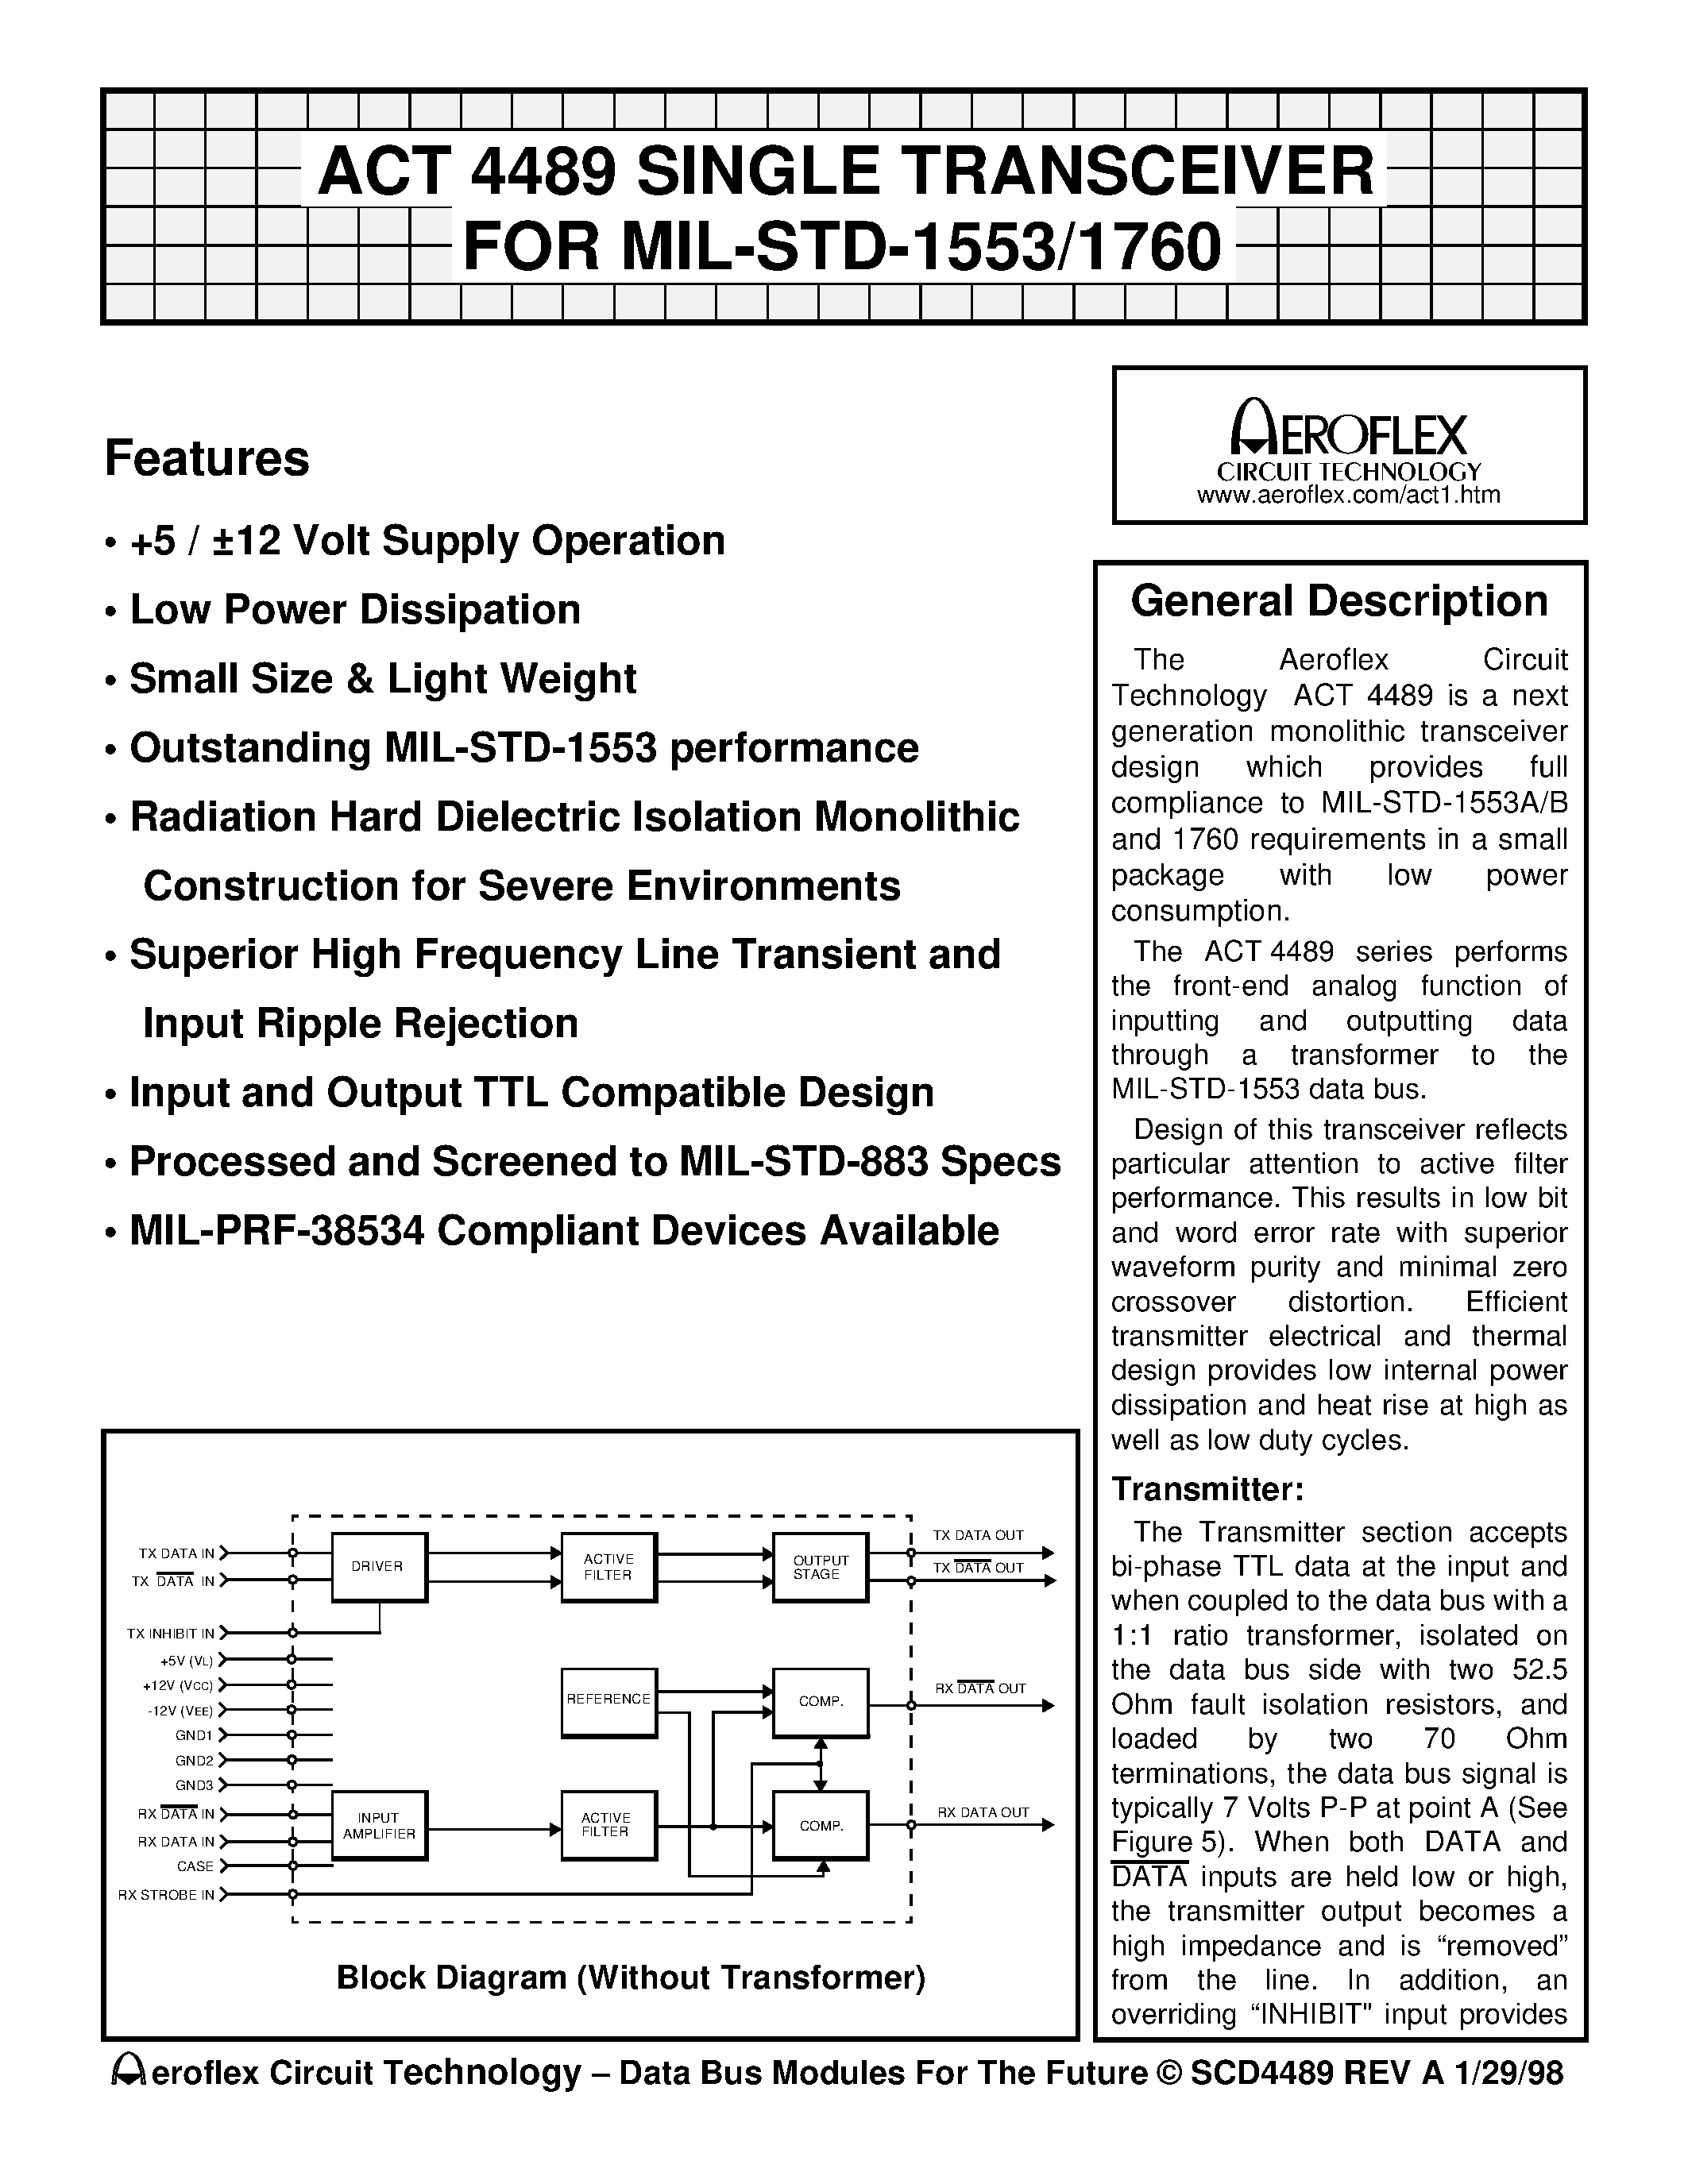 Datasheet ACT4489-FI - ACT 4489 SINGLE TRANSCEIVER FOR MIL-STD-1553/1760 page 1